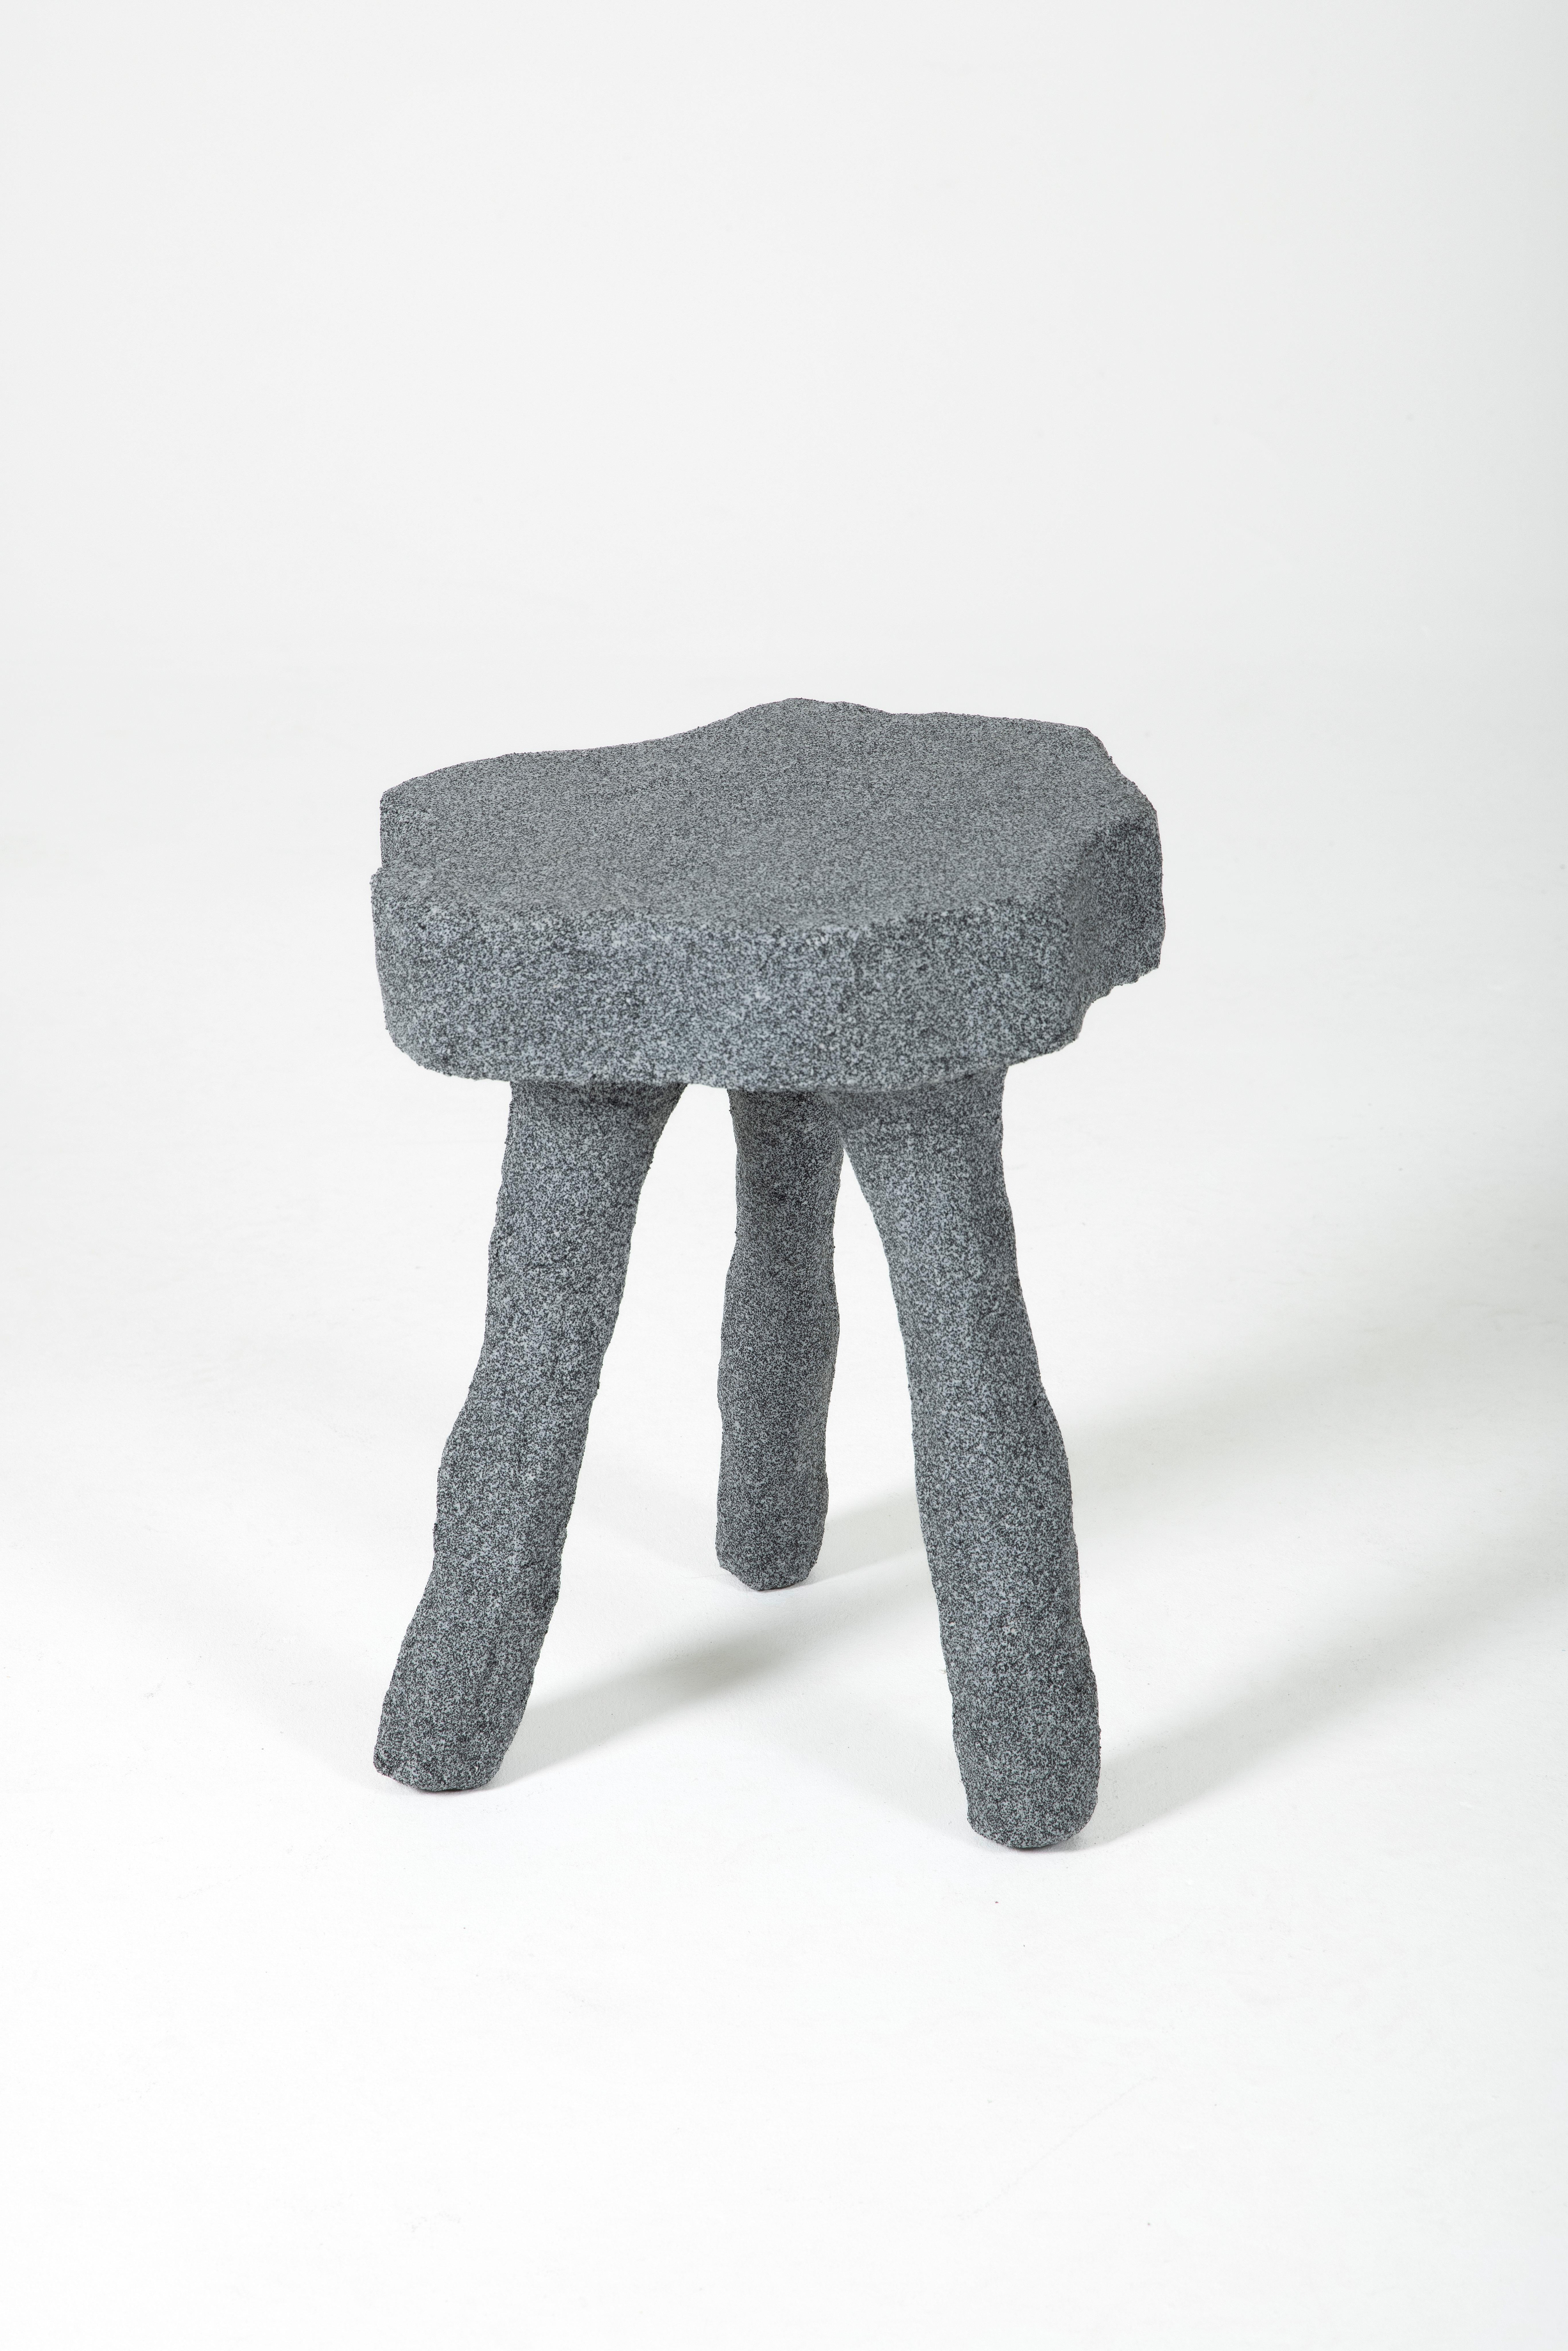 Other Pedestal Table in Plaster and Grey Sand by Paul Hardy